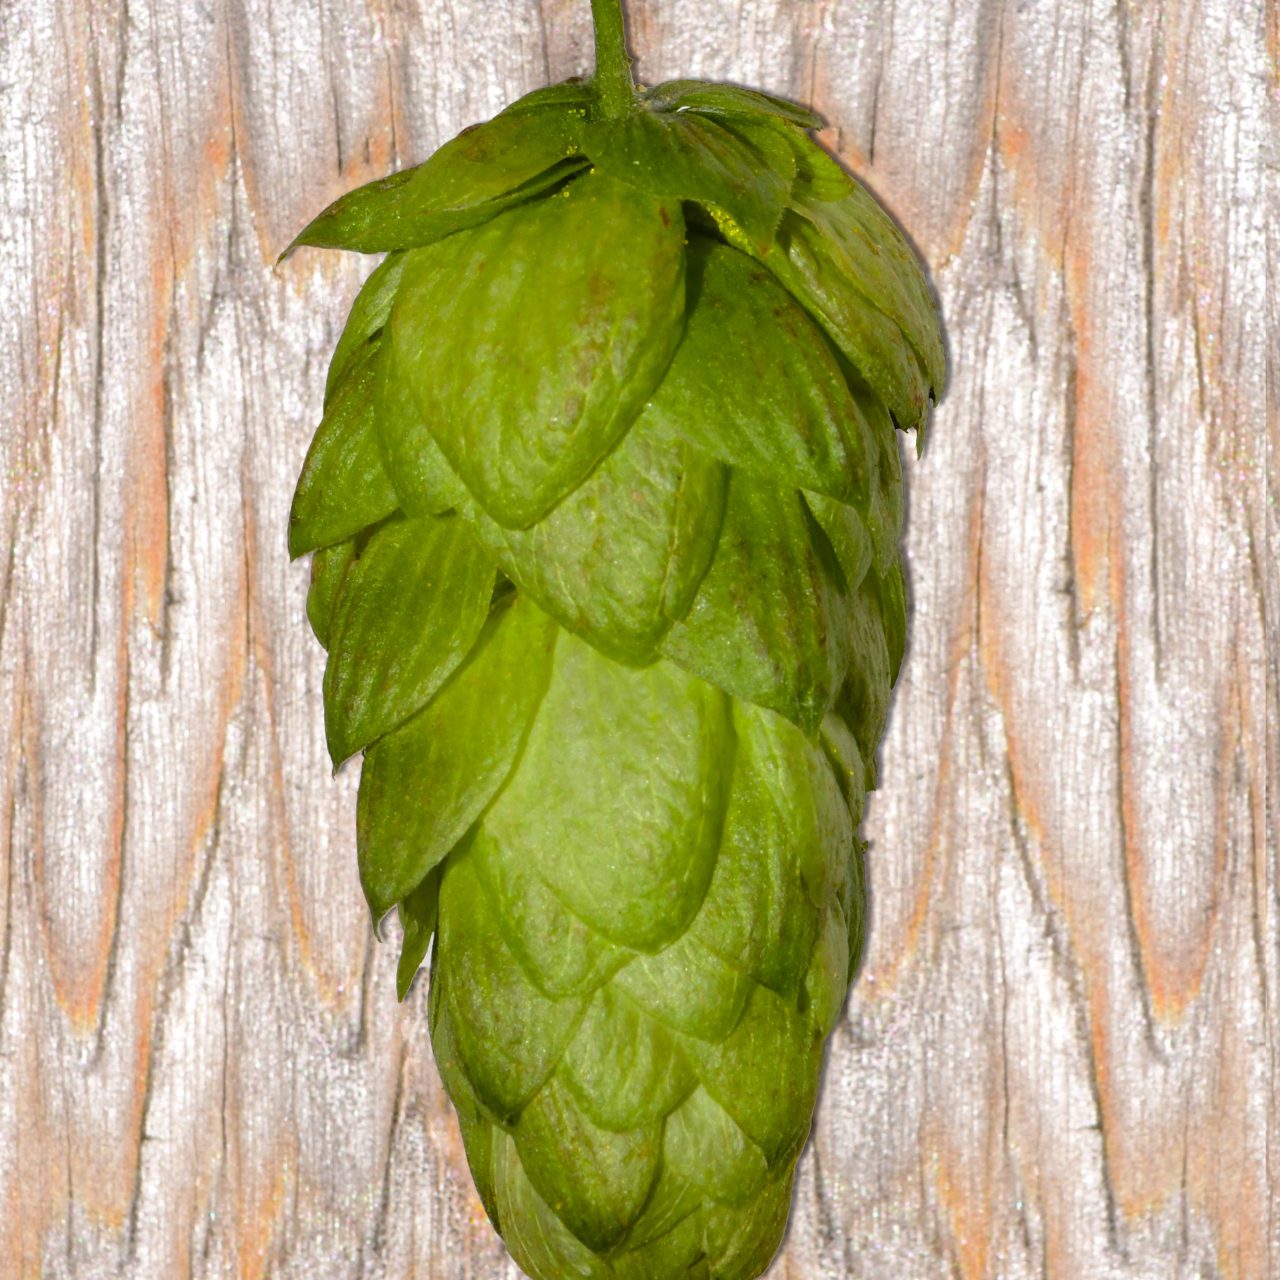 Hukins Hops Unveils an Exquisite Range of Home Brew Hops for Beer Aficionados and Home Brewers